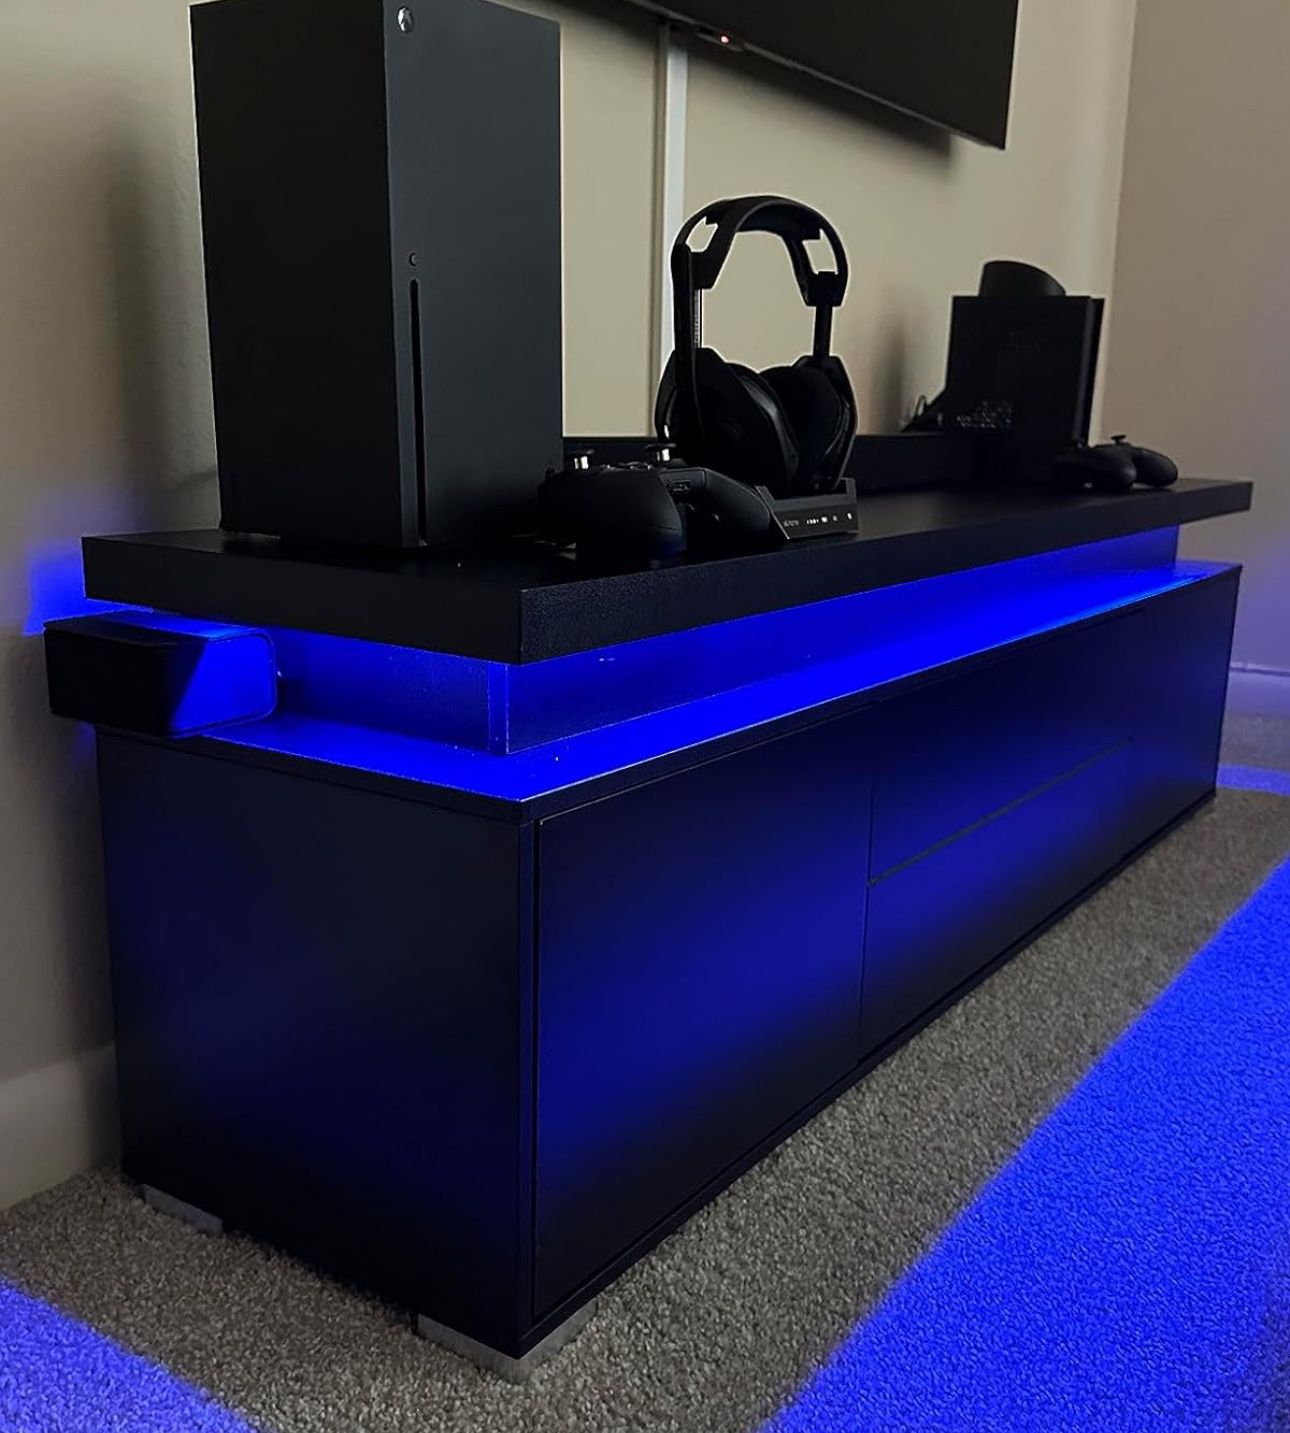 LIGHT UP TV STAND CHANGES COLORS